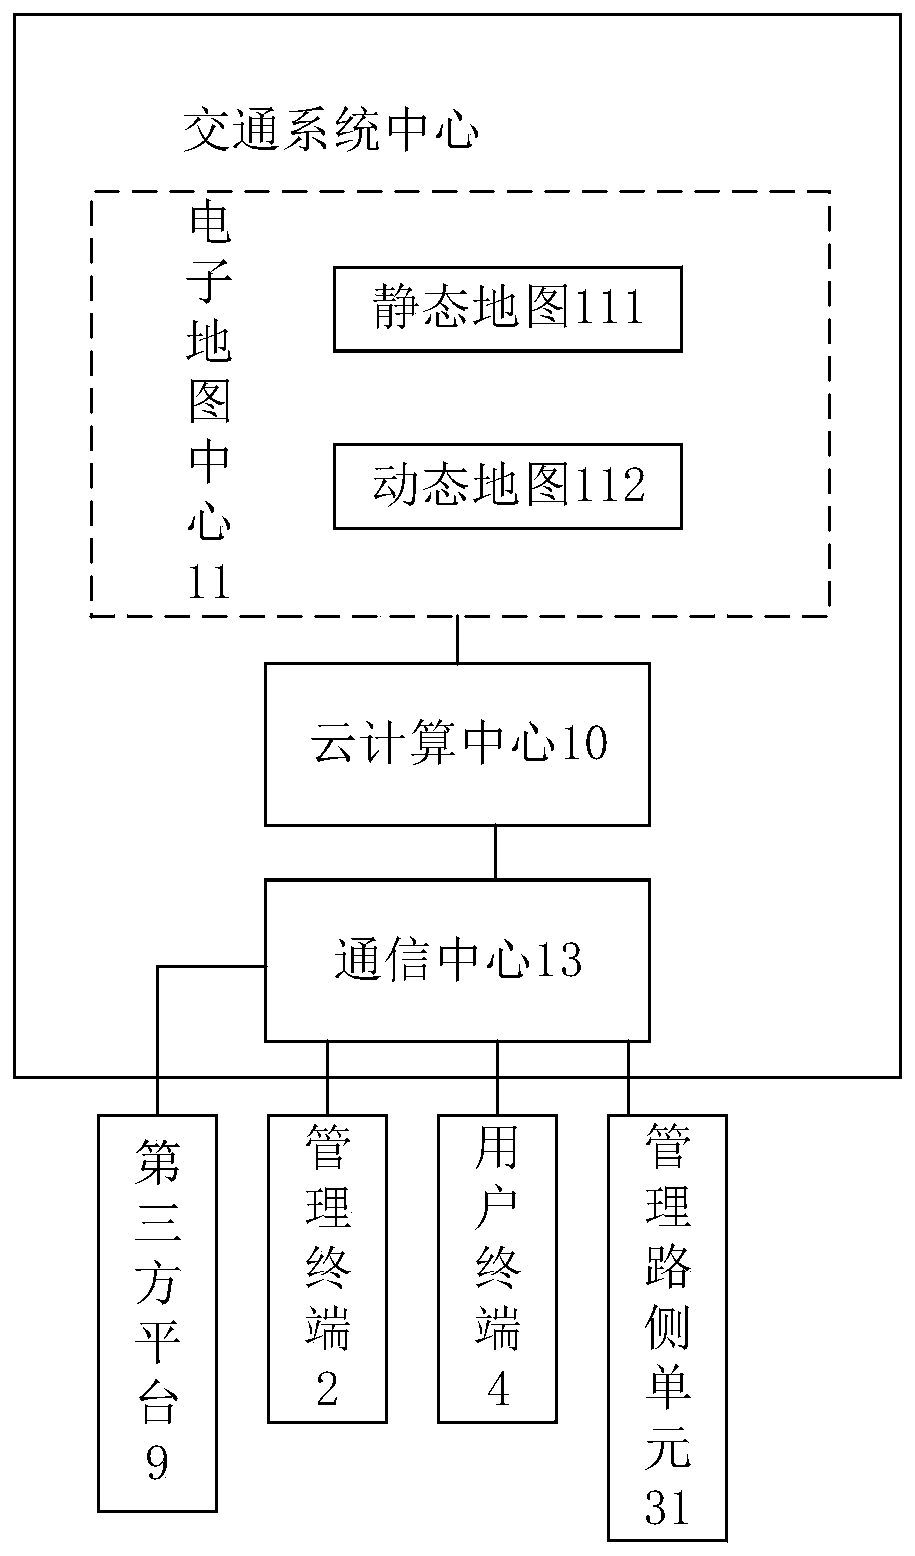 Traffic and travel information service system and method based on an electronic map